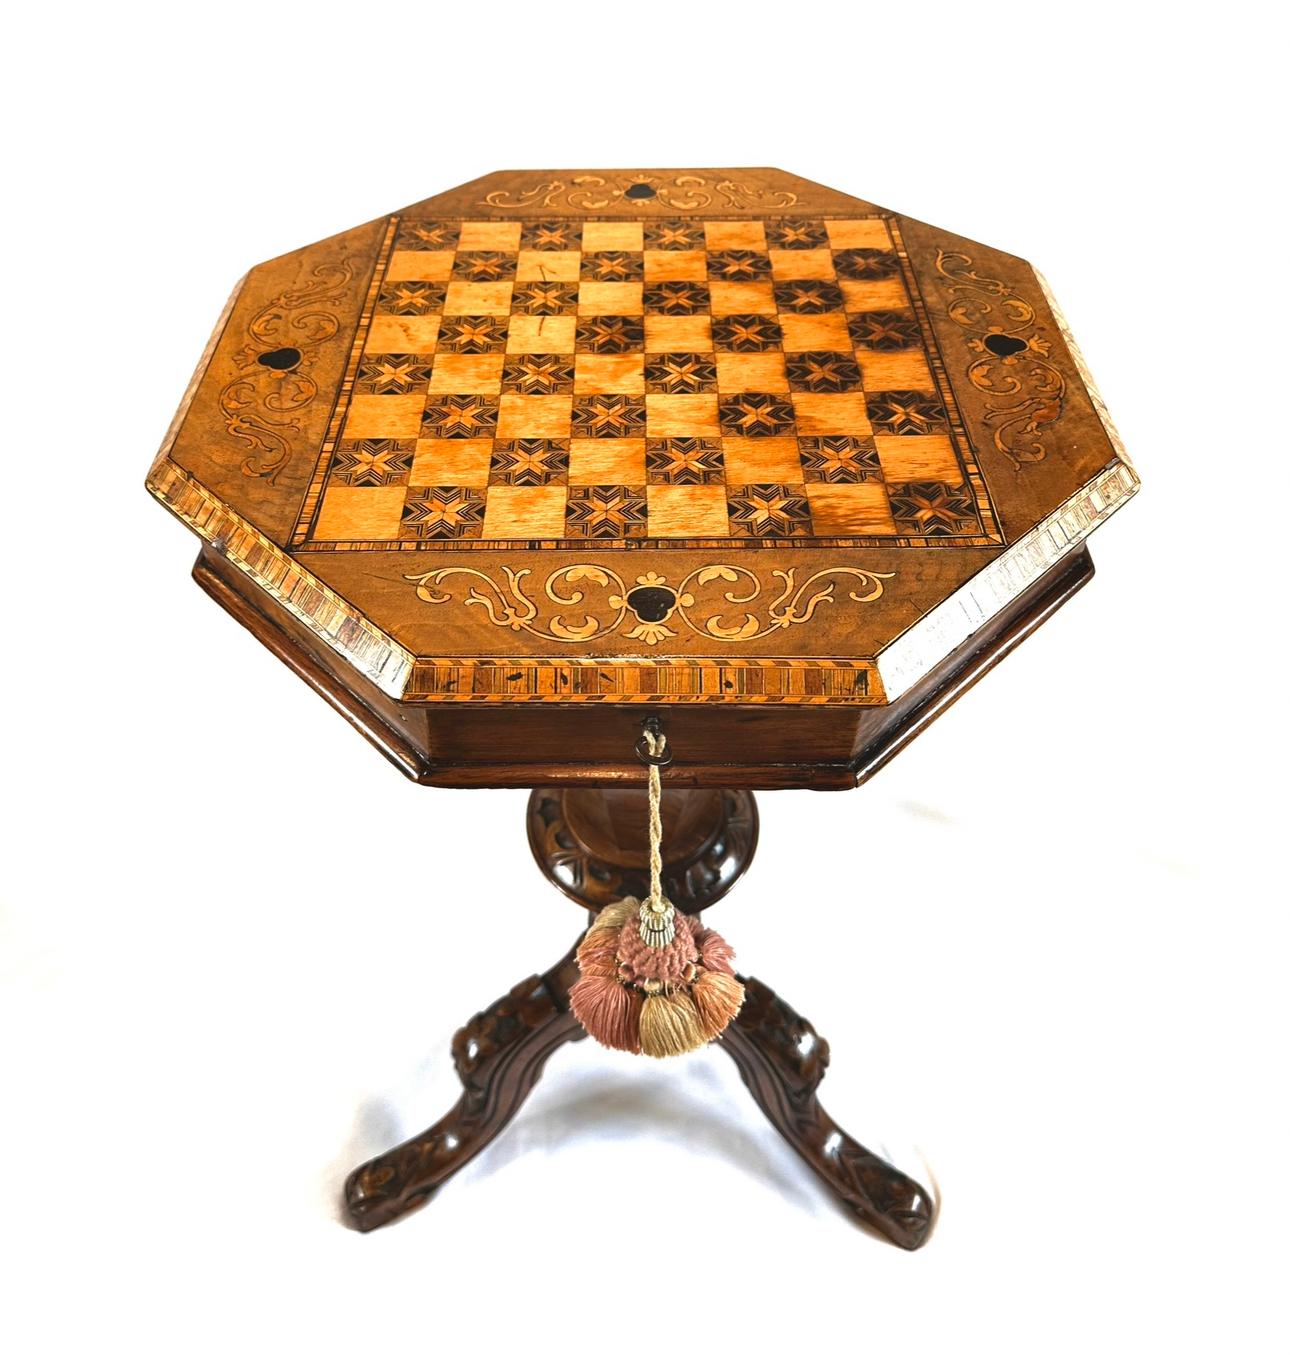 A superb quality, exquisitely handcrafted, English games/sewing table. Featuring delicate marquetry, banding inlay and intricate chequered cross banded inlay throughout.
Lift the lid to reveal a sewing box with original fitted interior comprising